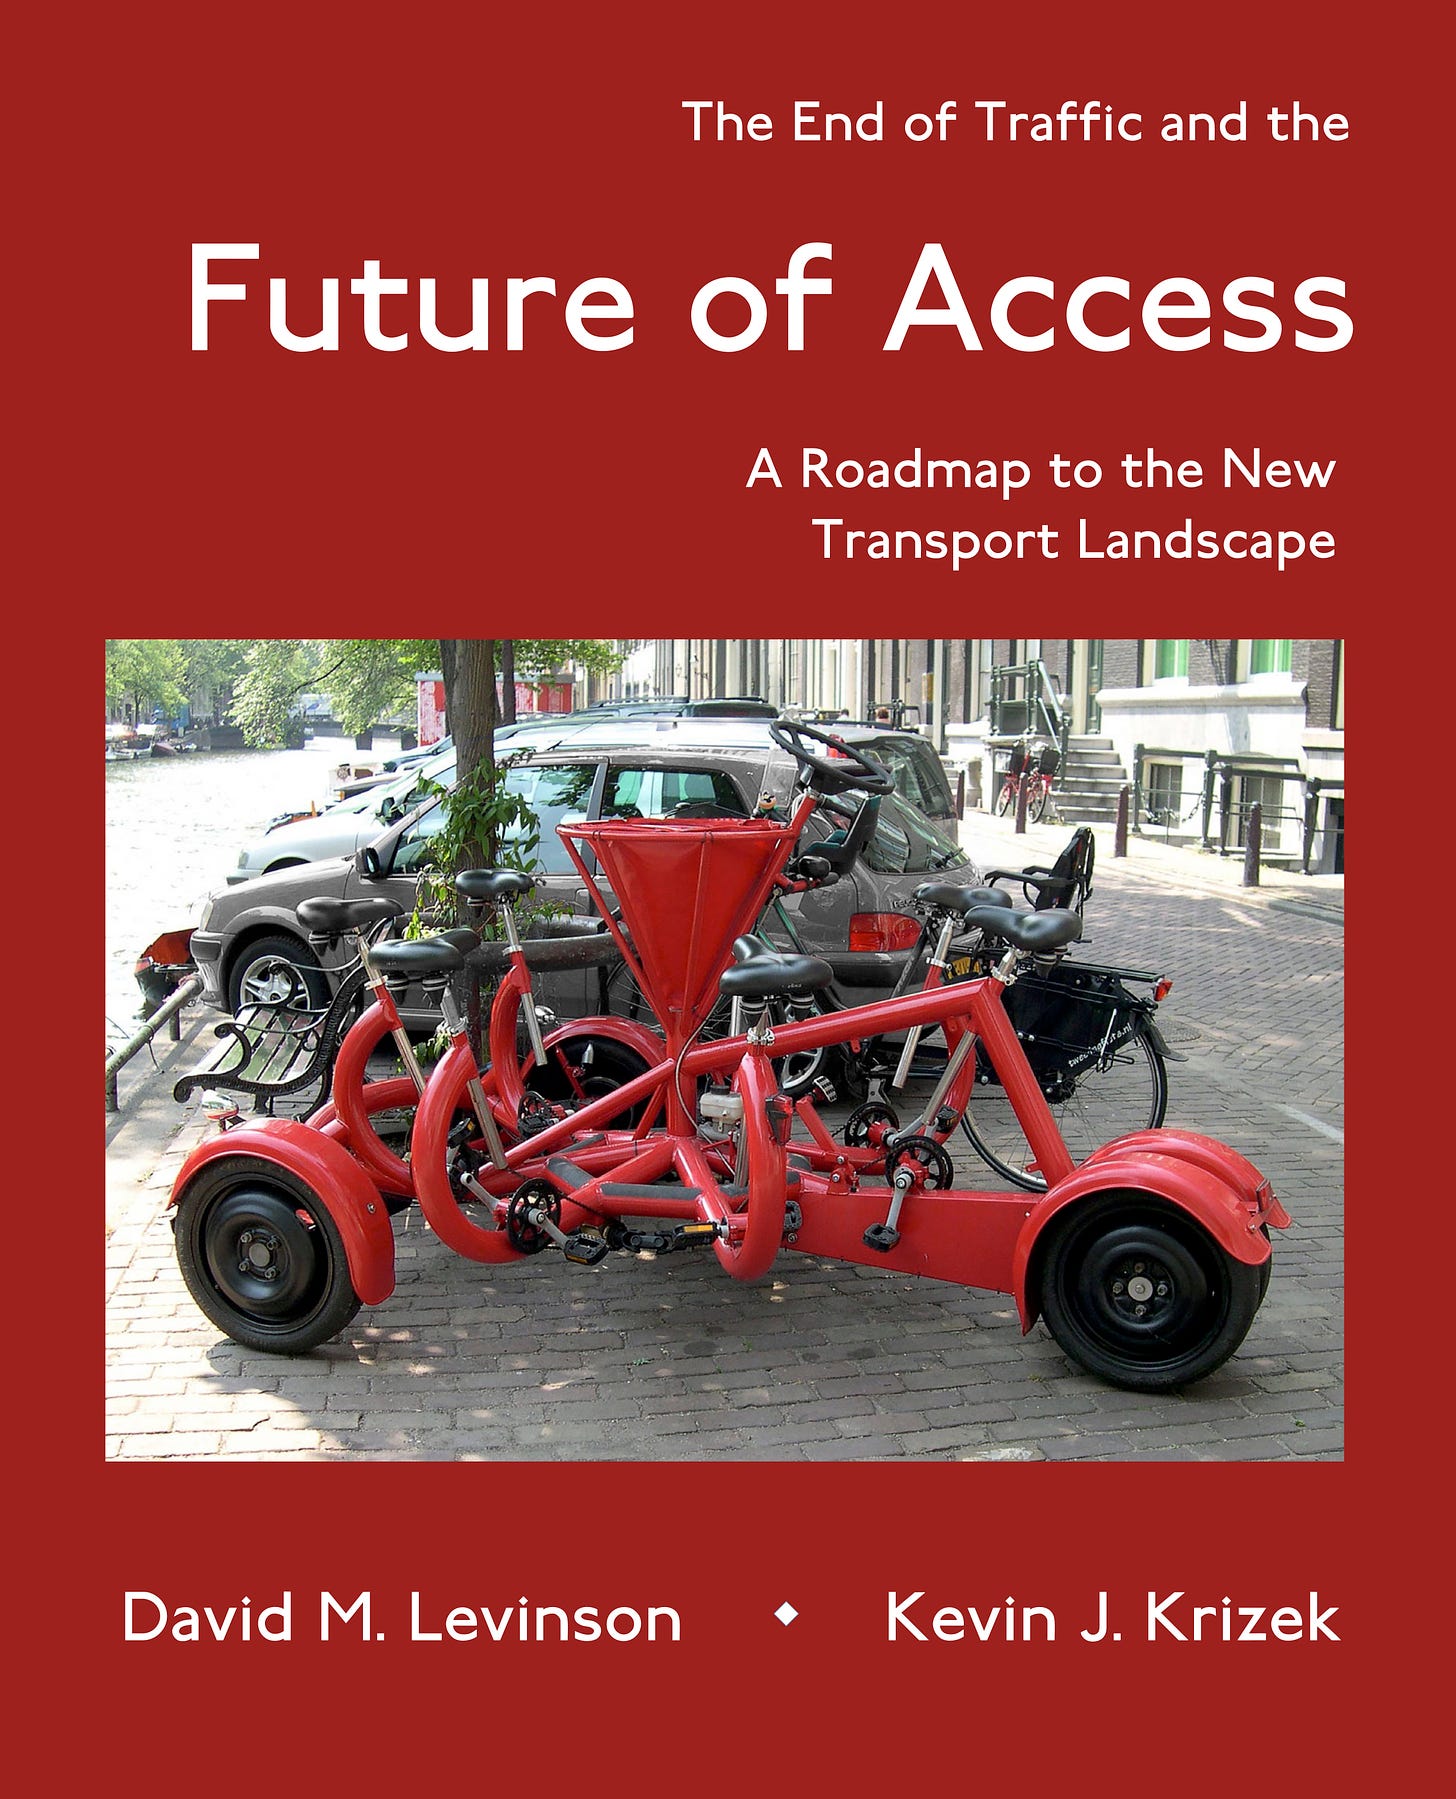 The End of Traffic and the Future of Access: A Roadmap to the New Transport Landscape. By David M. Levinson and Kevin J. Krizek.